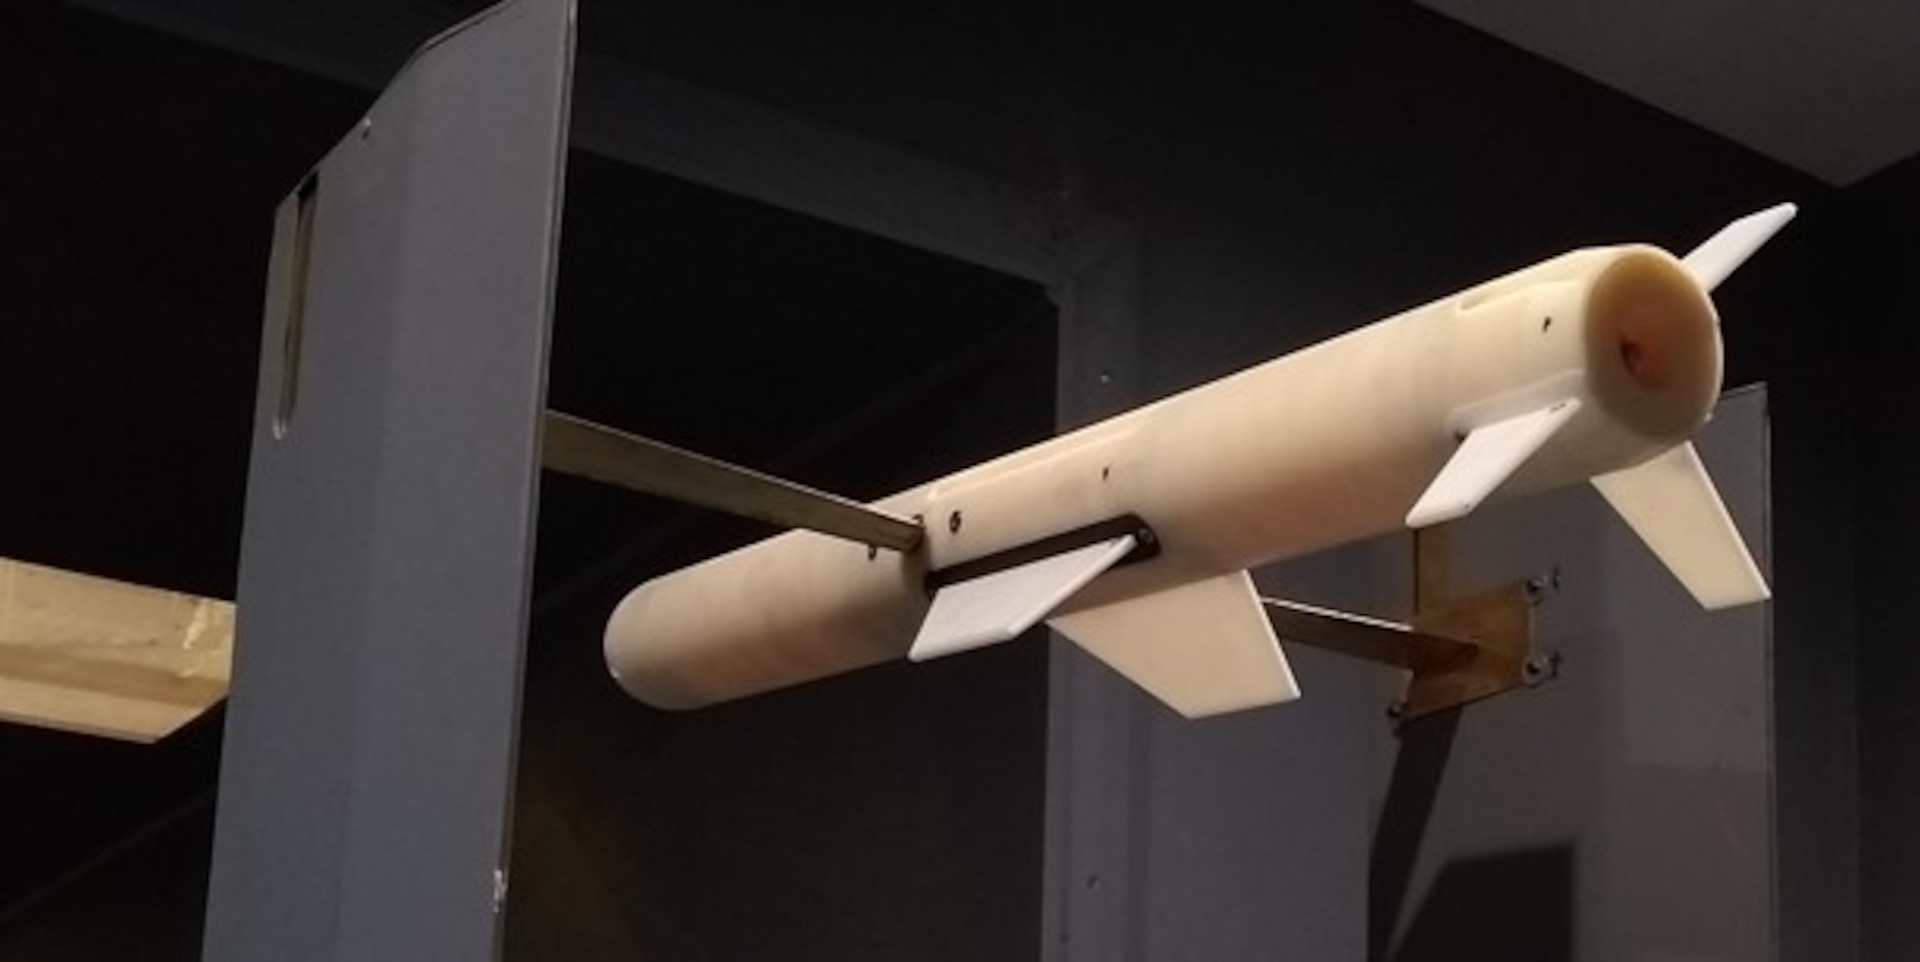 IMAGE: A test model of a damaged missile with a missing wing and tail fin is pictured at West Virginia University’s wind tunnel. Naval Surface Warfare Center Dahlgren Division (NSWCDD) threat engineers are performing analysis to predict the aerodynamics of damaged states systems to produce prototype research methods and simulations. Research conducted by West Virginia University in collaboration with NSWCDD aerospace and threat engineers – especially its wind tunnel testing – is playing a significant role in evaluating the munition effectiveness of nonlethal engagement scenarios in support of the NSWCDD Damaged State Modeling of a Post Intercept Threat Program.